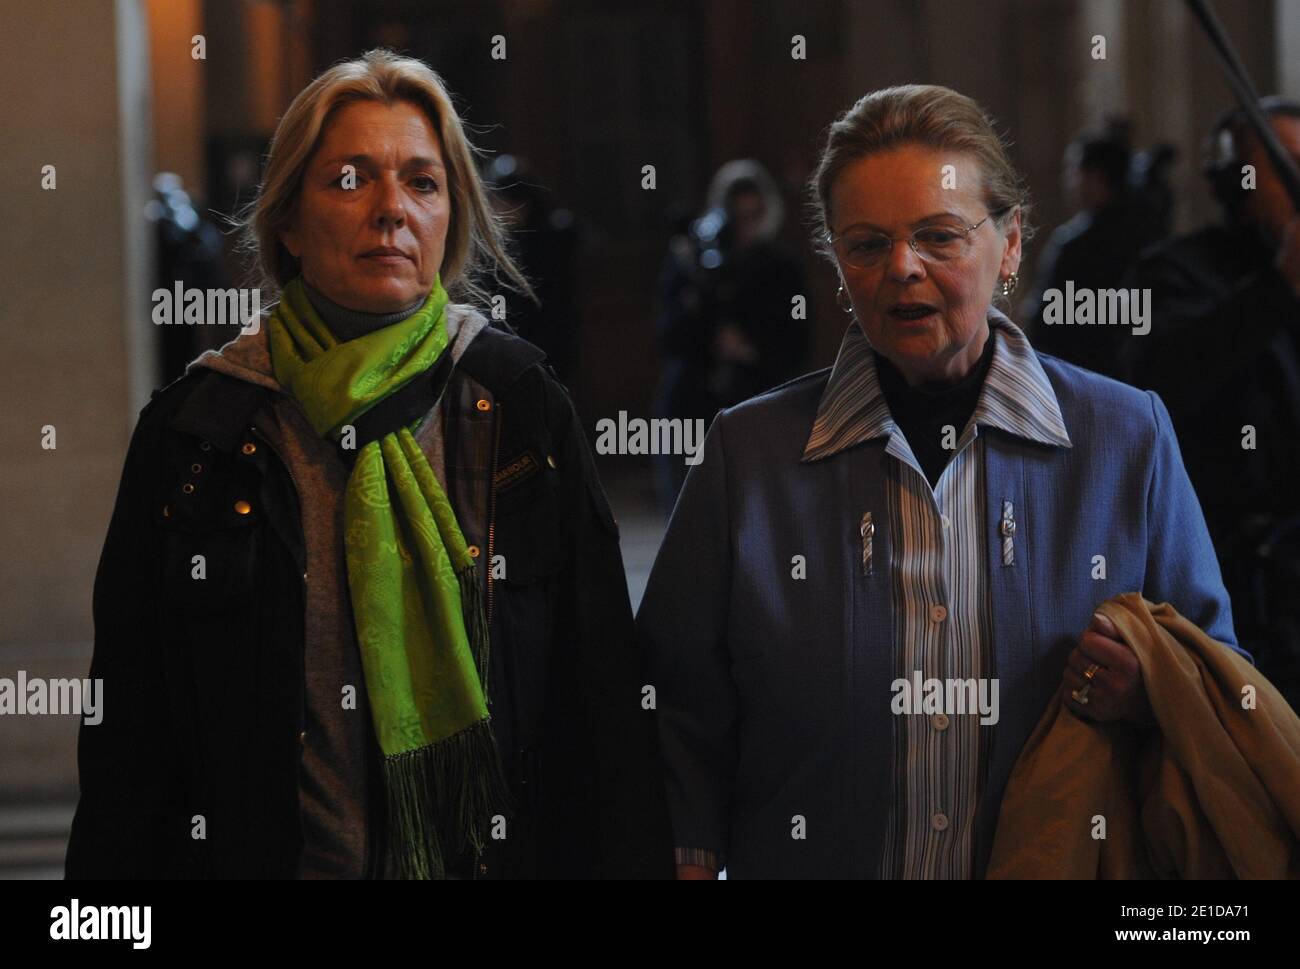 Diana Gunther (L), the daughter of German cardiologist Dieter Krombach, and Krombach's sister (R) at the Palais de Justice where they attended the second day of Krombach's trial for the murder of Kalinka Bamberski, in Paris, France on March 30, 2011. The French court today decided to continue the trial of the German doctor, who is accused of having raped and killed his then 14-year-old stepdaughter, Kalinka Bamberski, in the summer of 1982 while she was holidaying with her mother at Krombach's home at Lake Constance, southern Germany. A court in Germany ruled that Krombach could not be held re Stock Photo